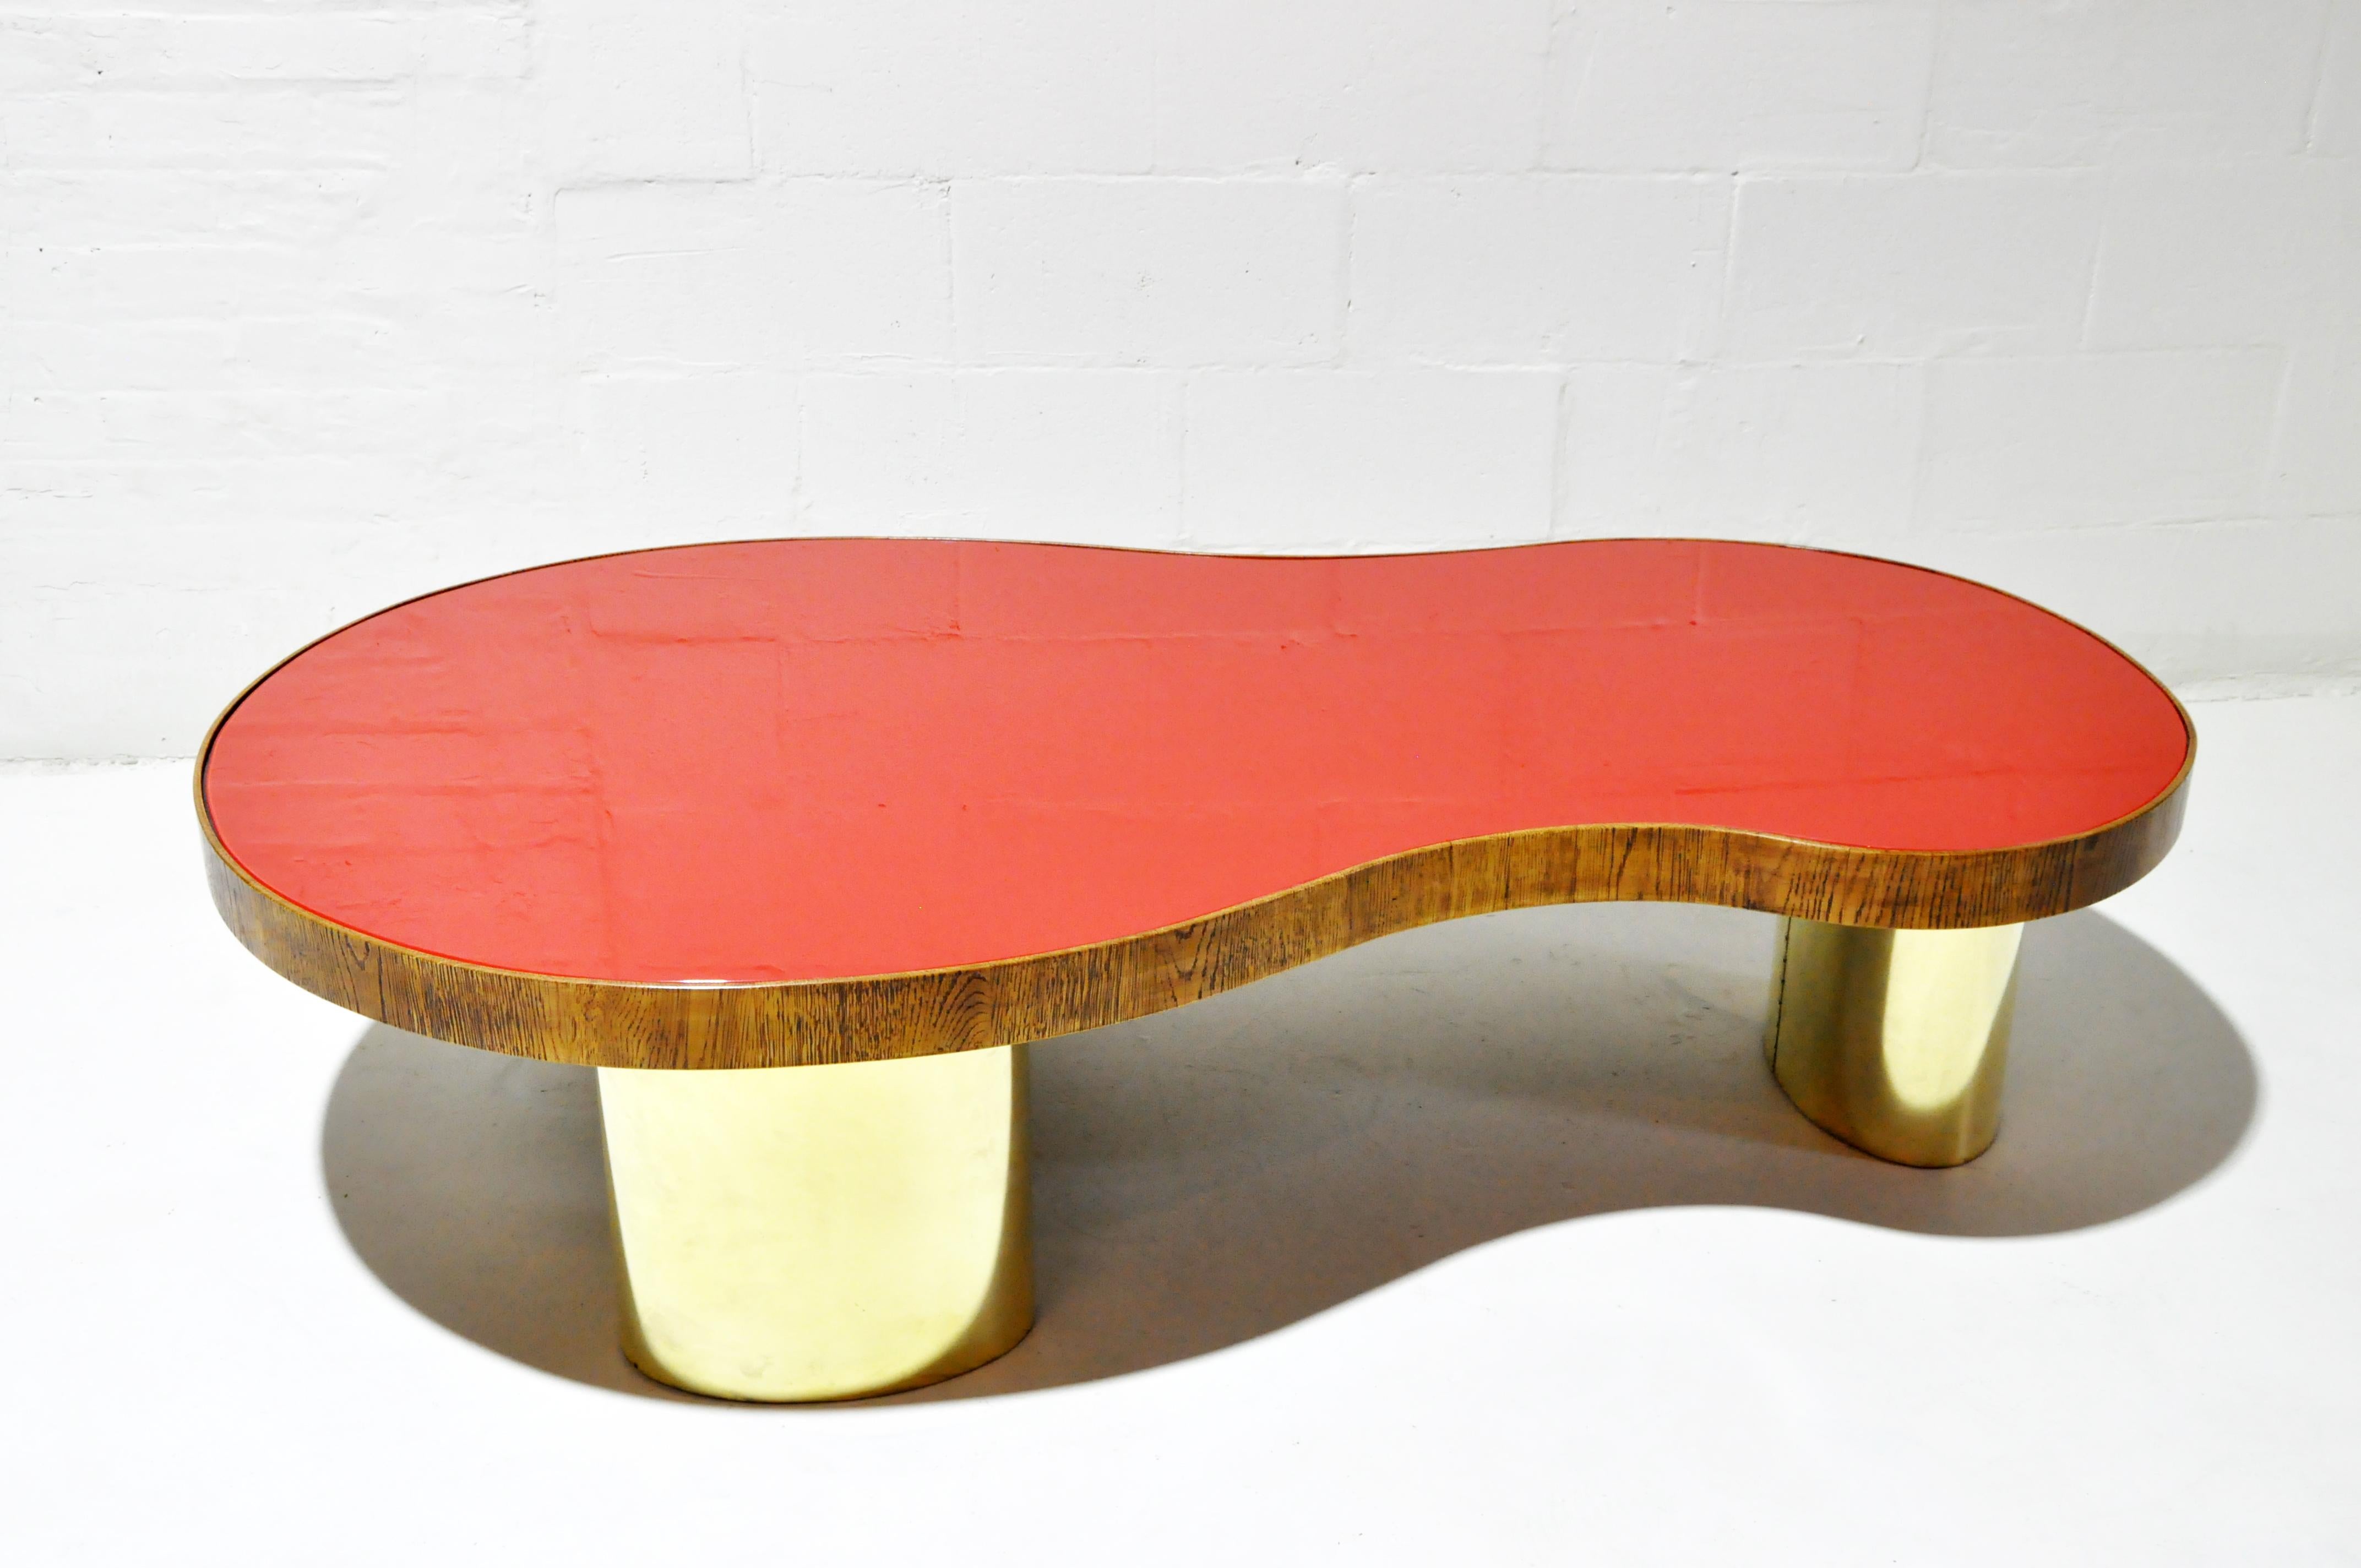 A rare kidney-shaped coffee table with a red glass top, cylindrical brass legs and walnut edge trim.
       